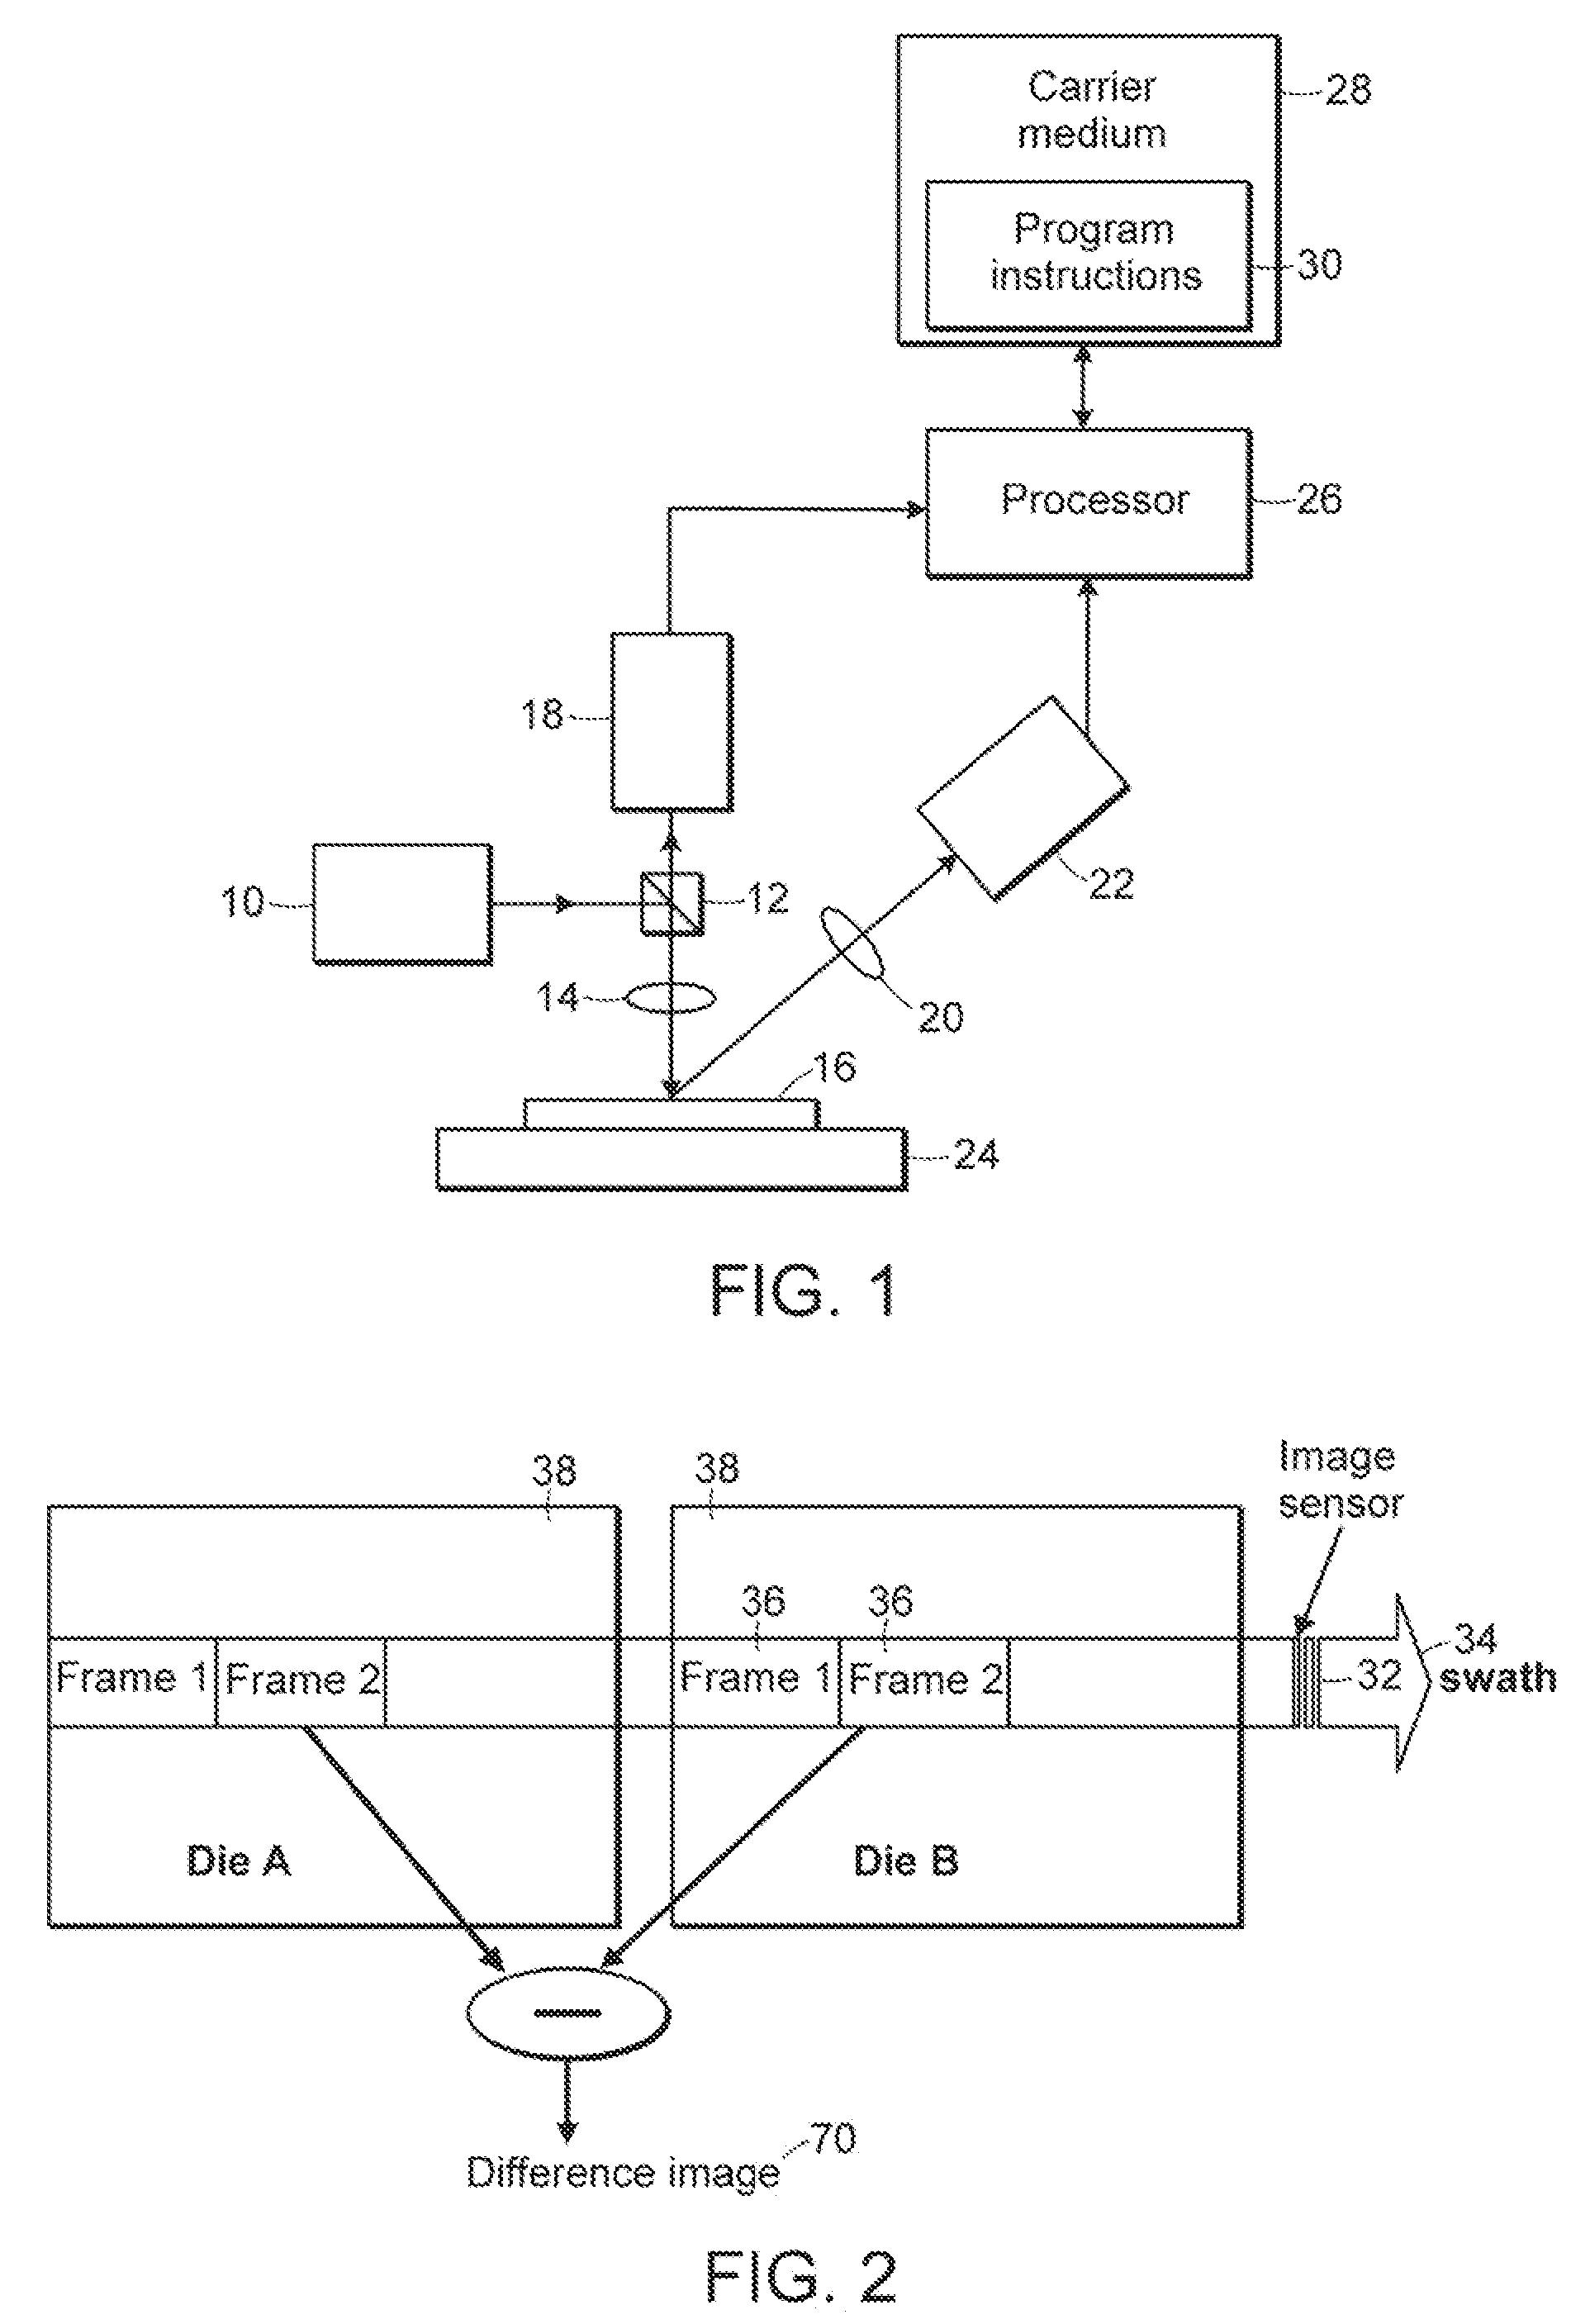 Semiconductor device property extraction, generation, visualization, and monitoring methods